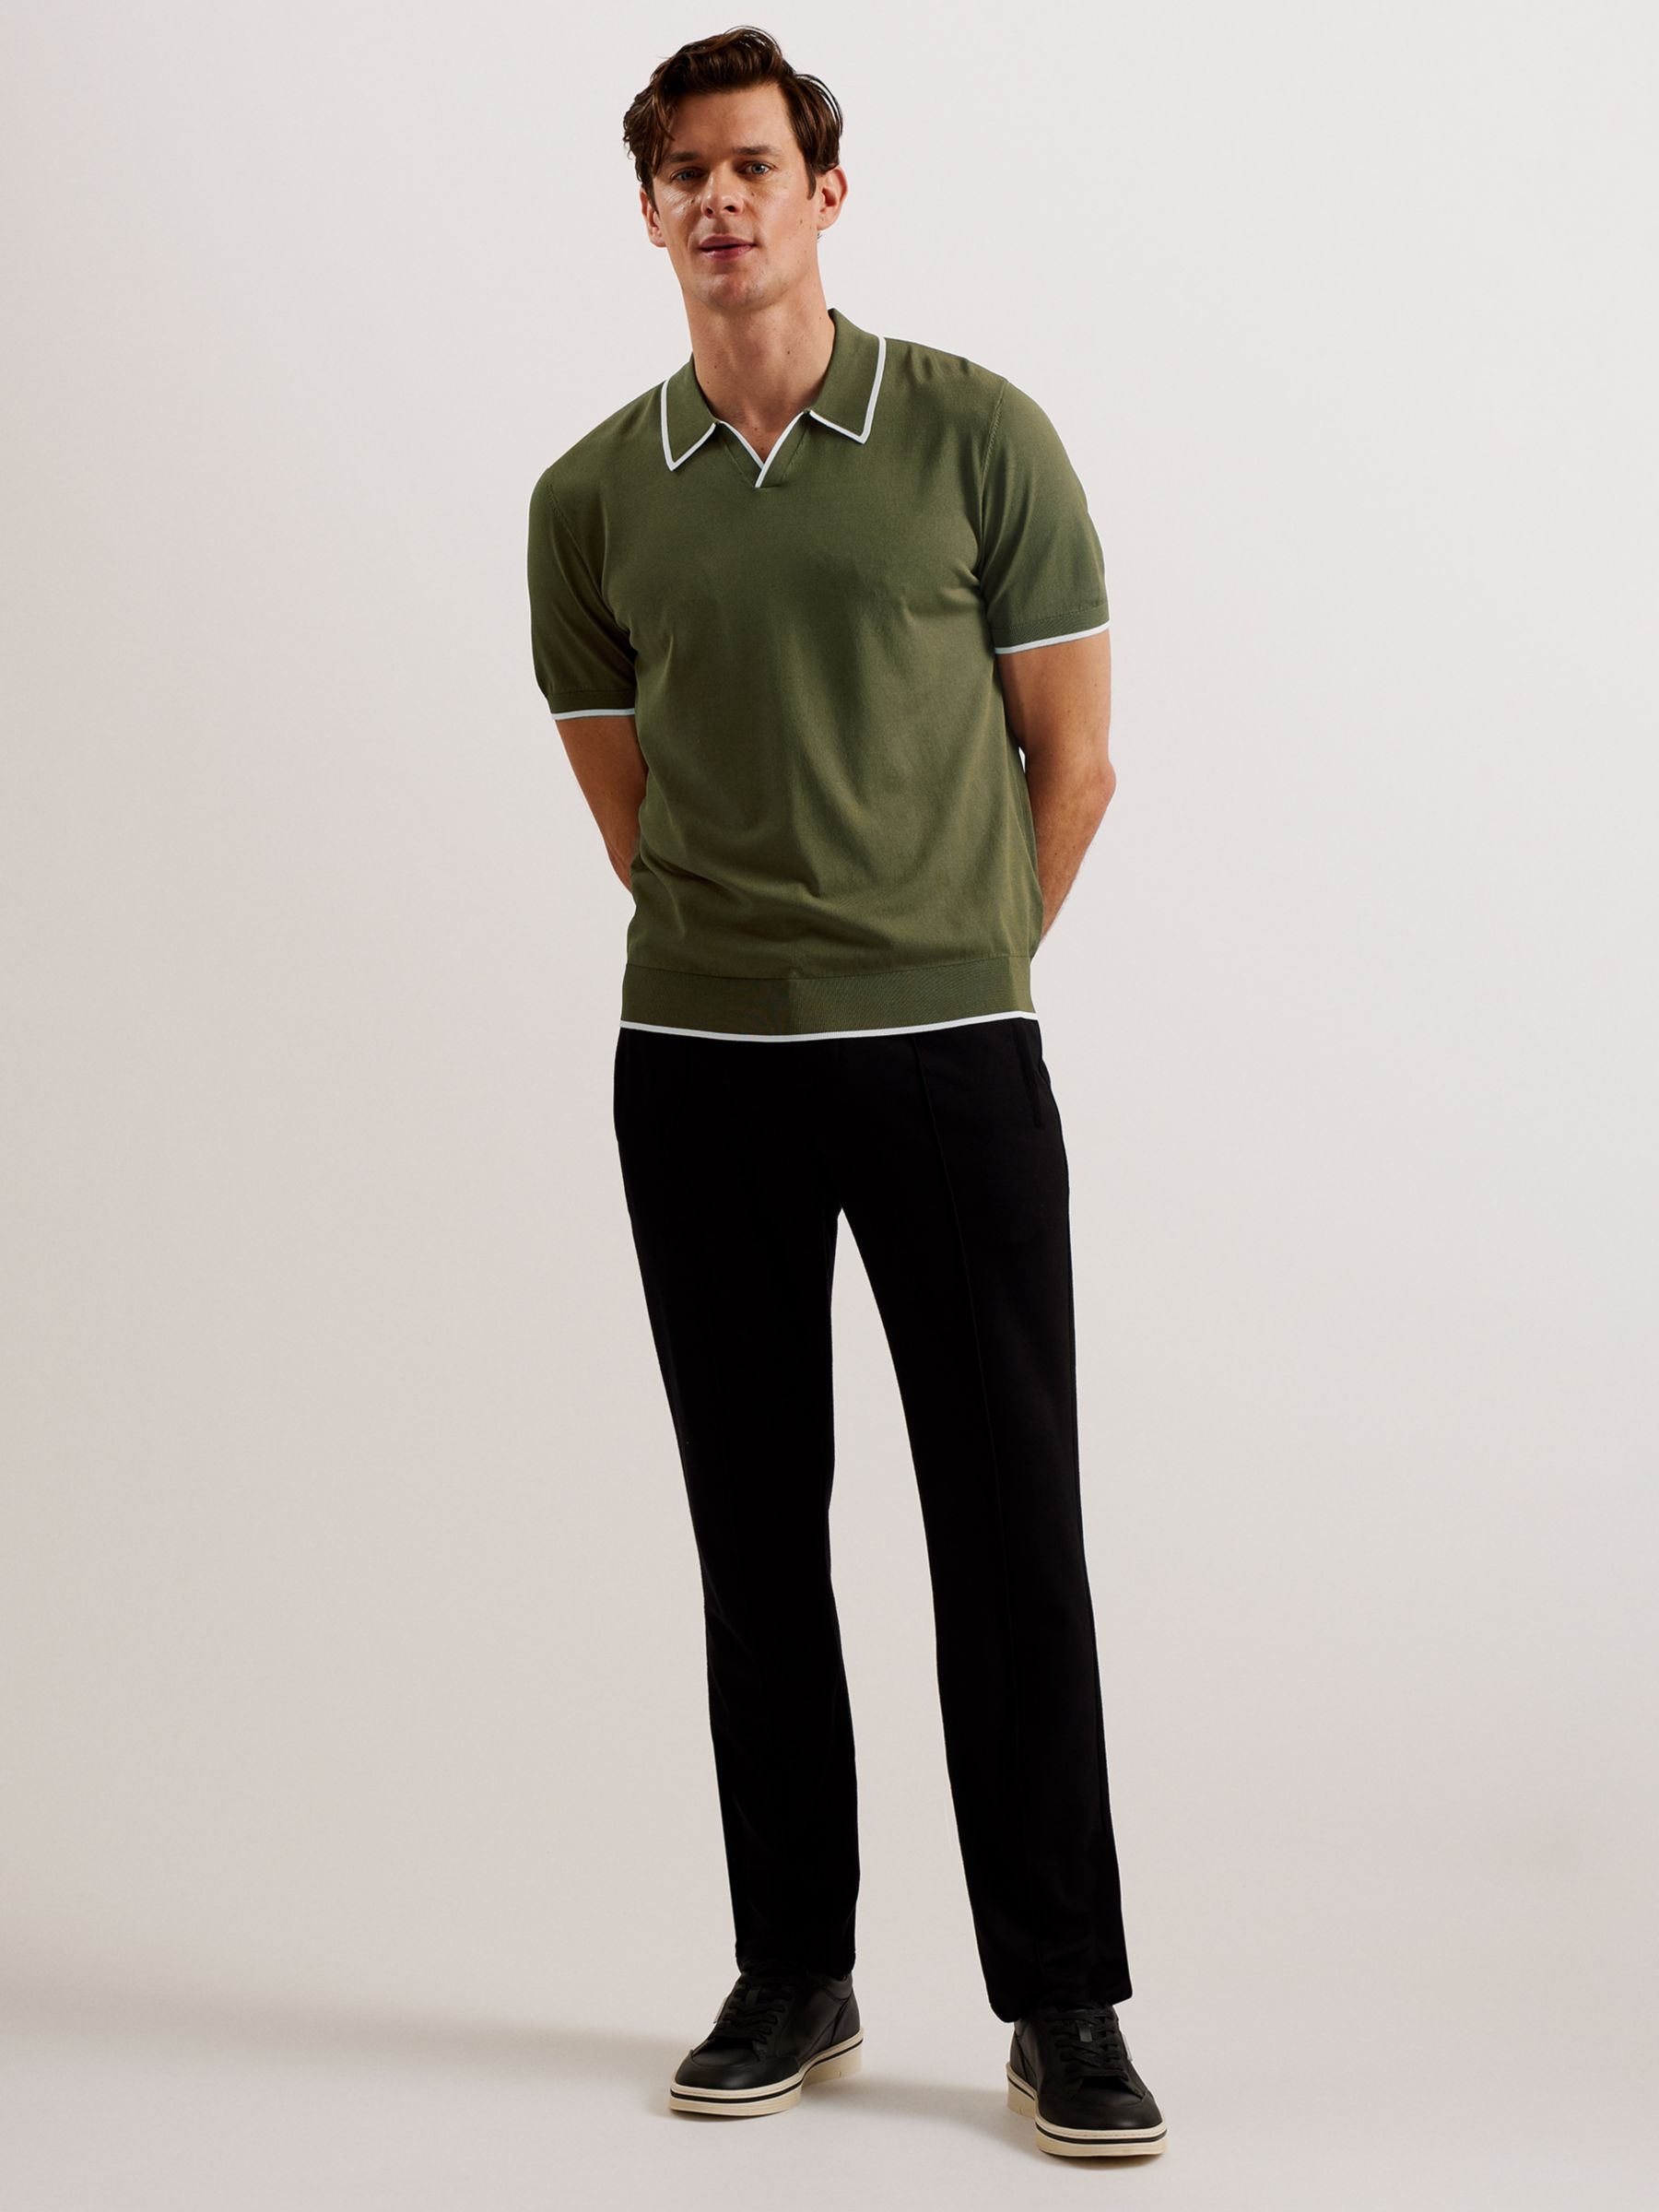 Ted Baker Open Neck Polo Top, Green Olive, XS